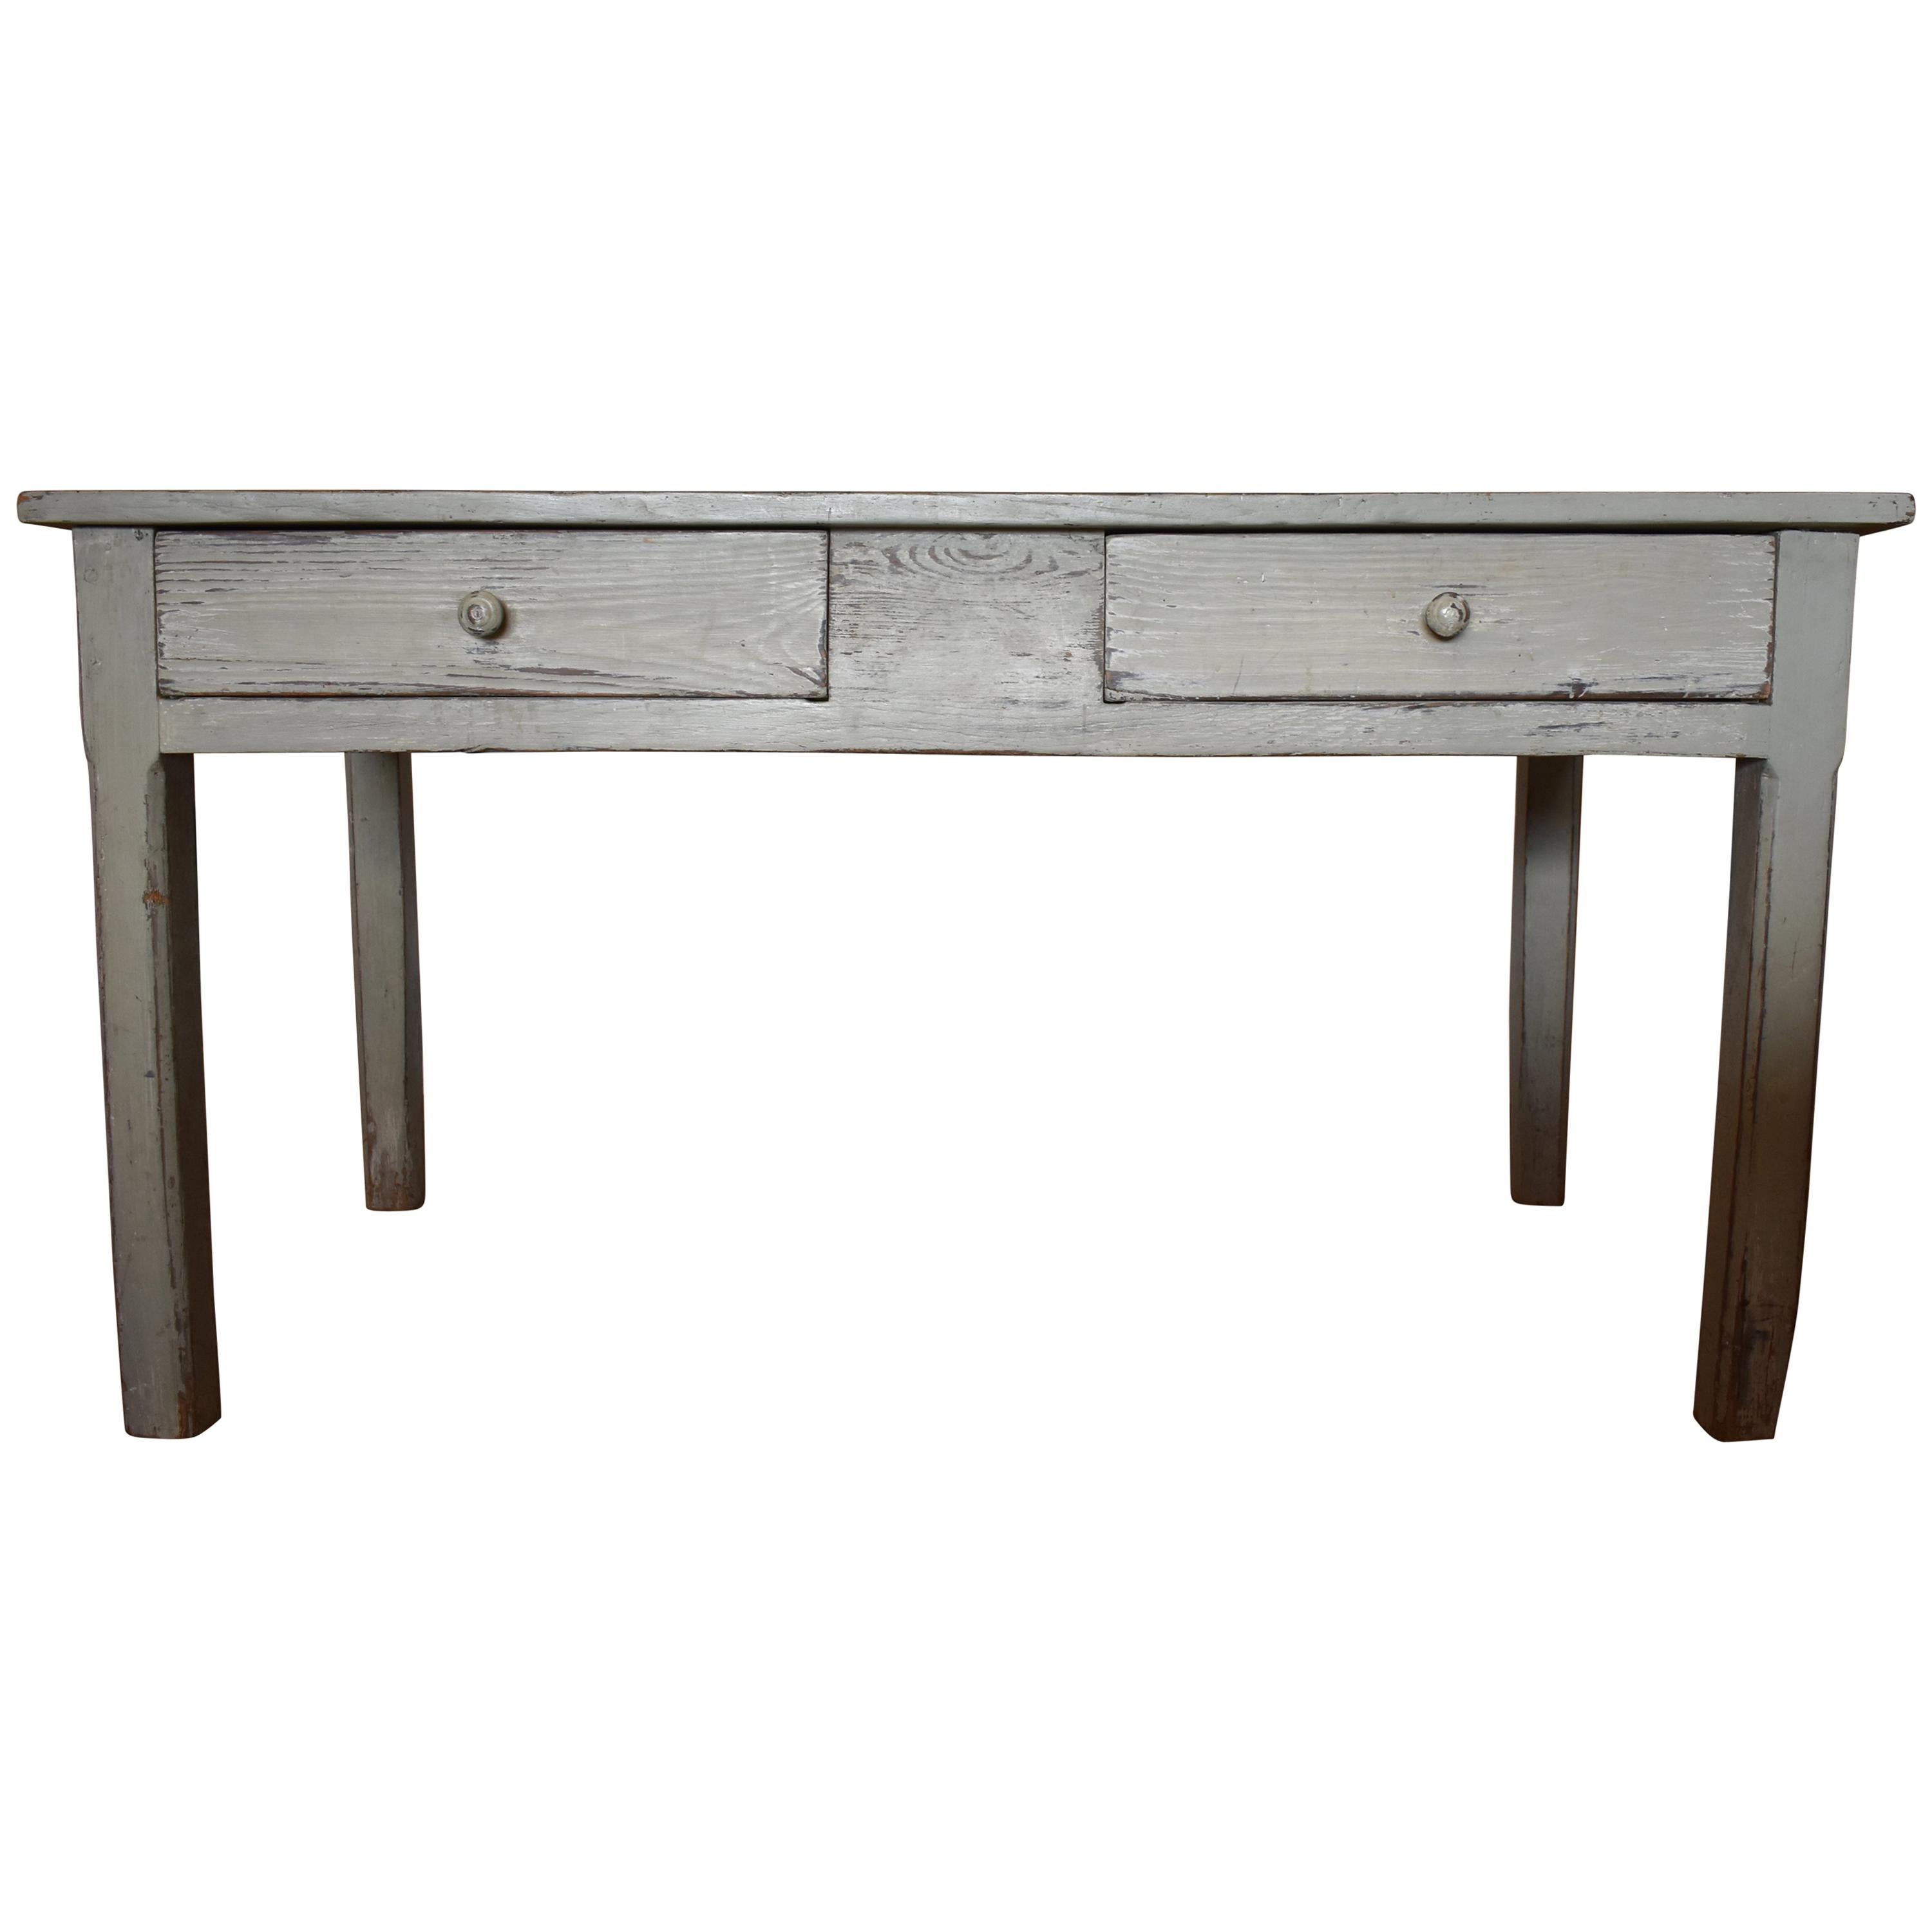 19th Century French Painted Rustic Farm Table For Sale